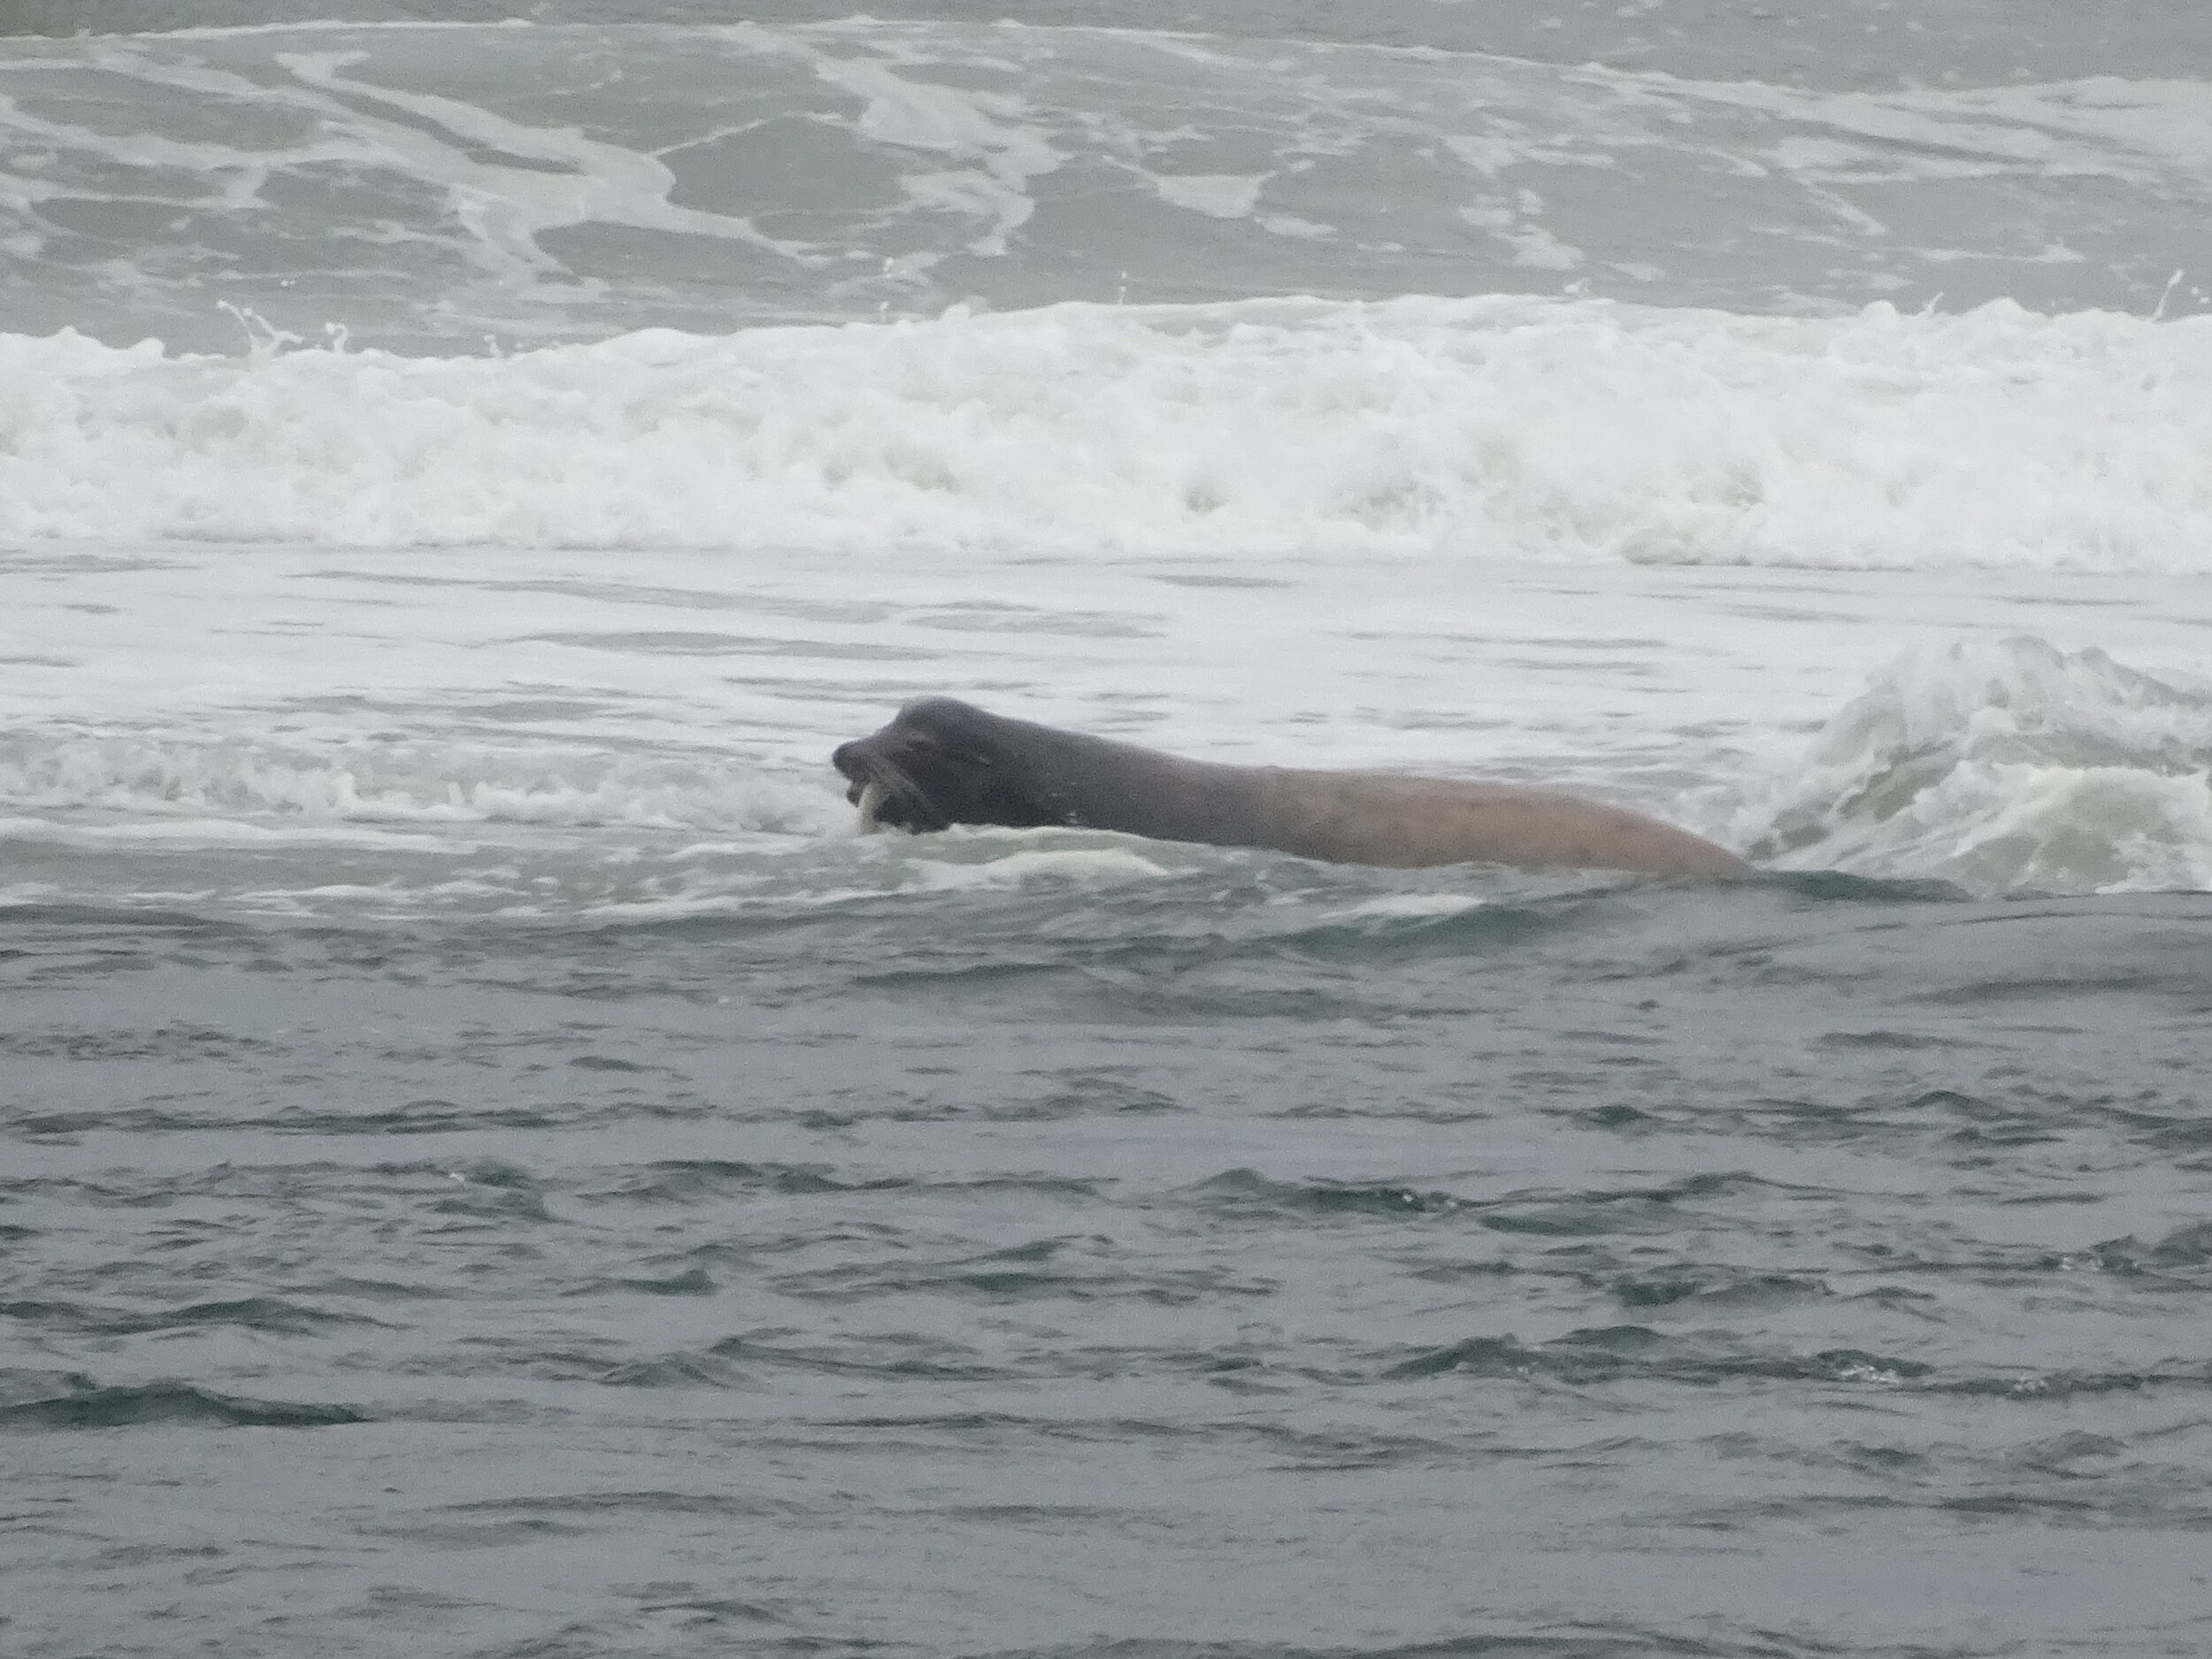 This sea lion caught a fish in the last wave that crashed over him!  Photo by Karen Boudreaux, June 12, 2021